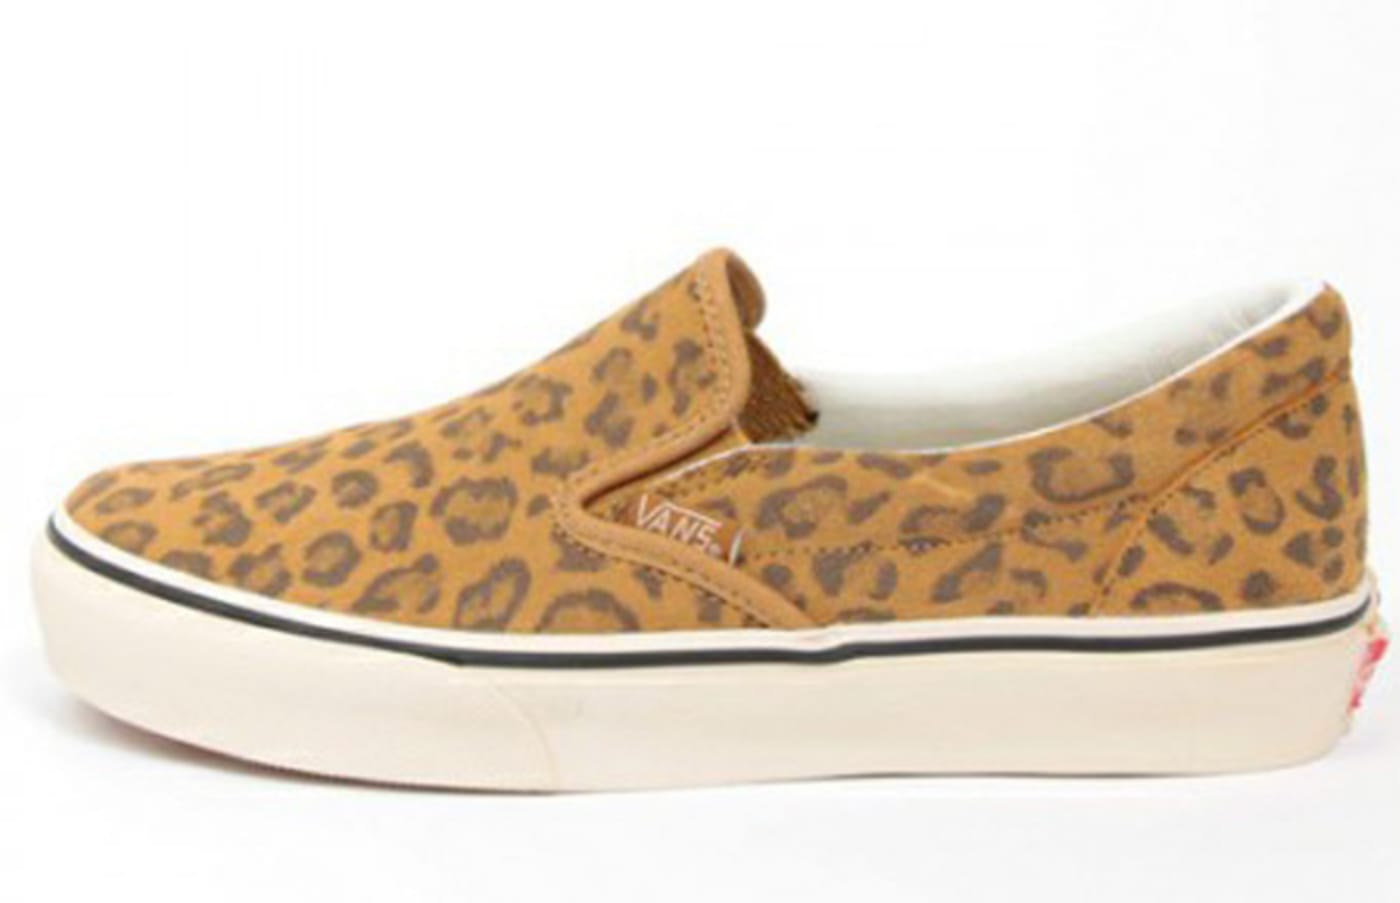 Beauty & Youth x Vans Leopard Slip-On | Complex